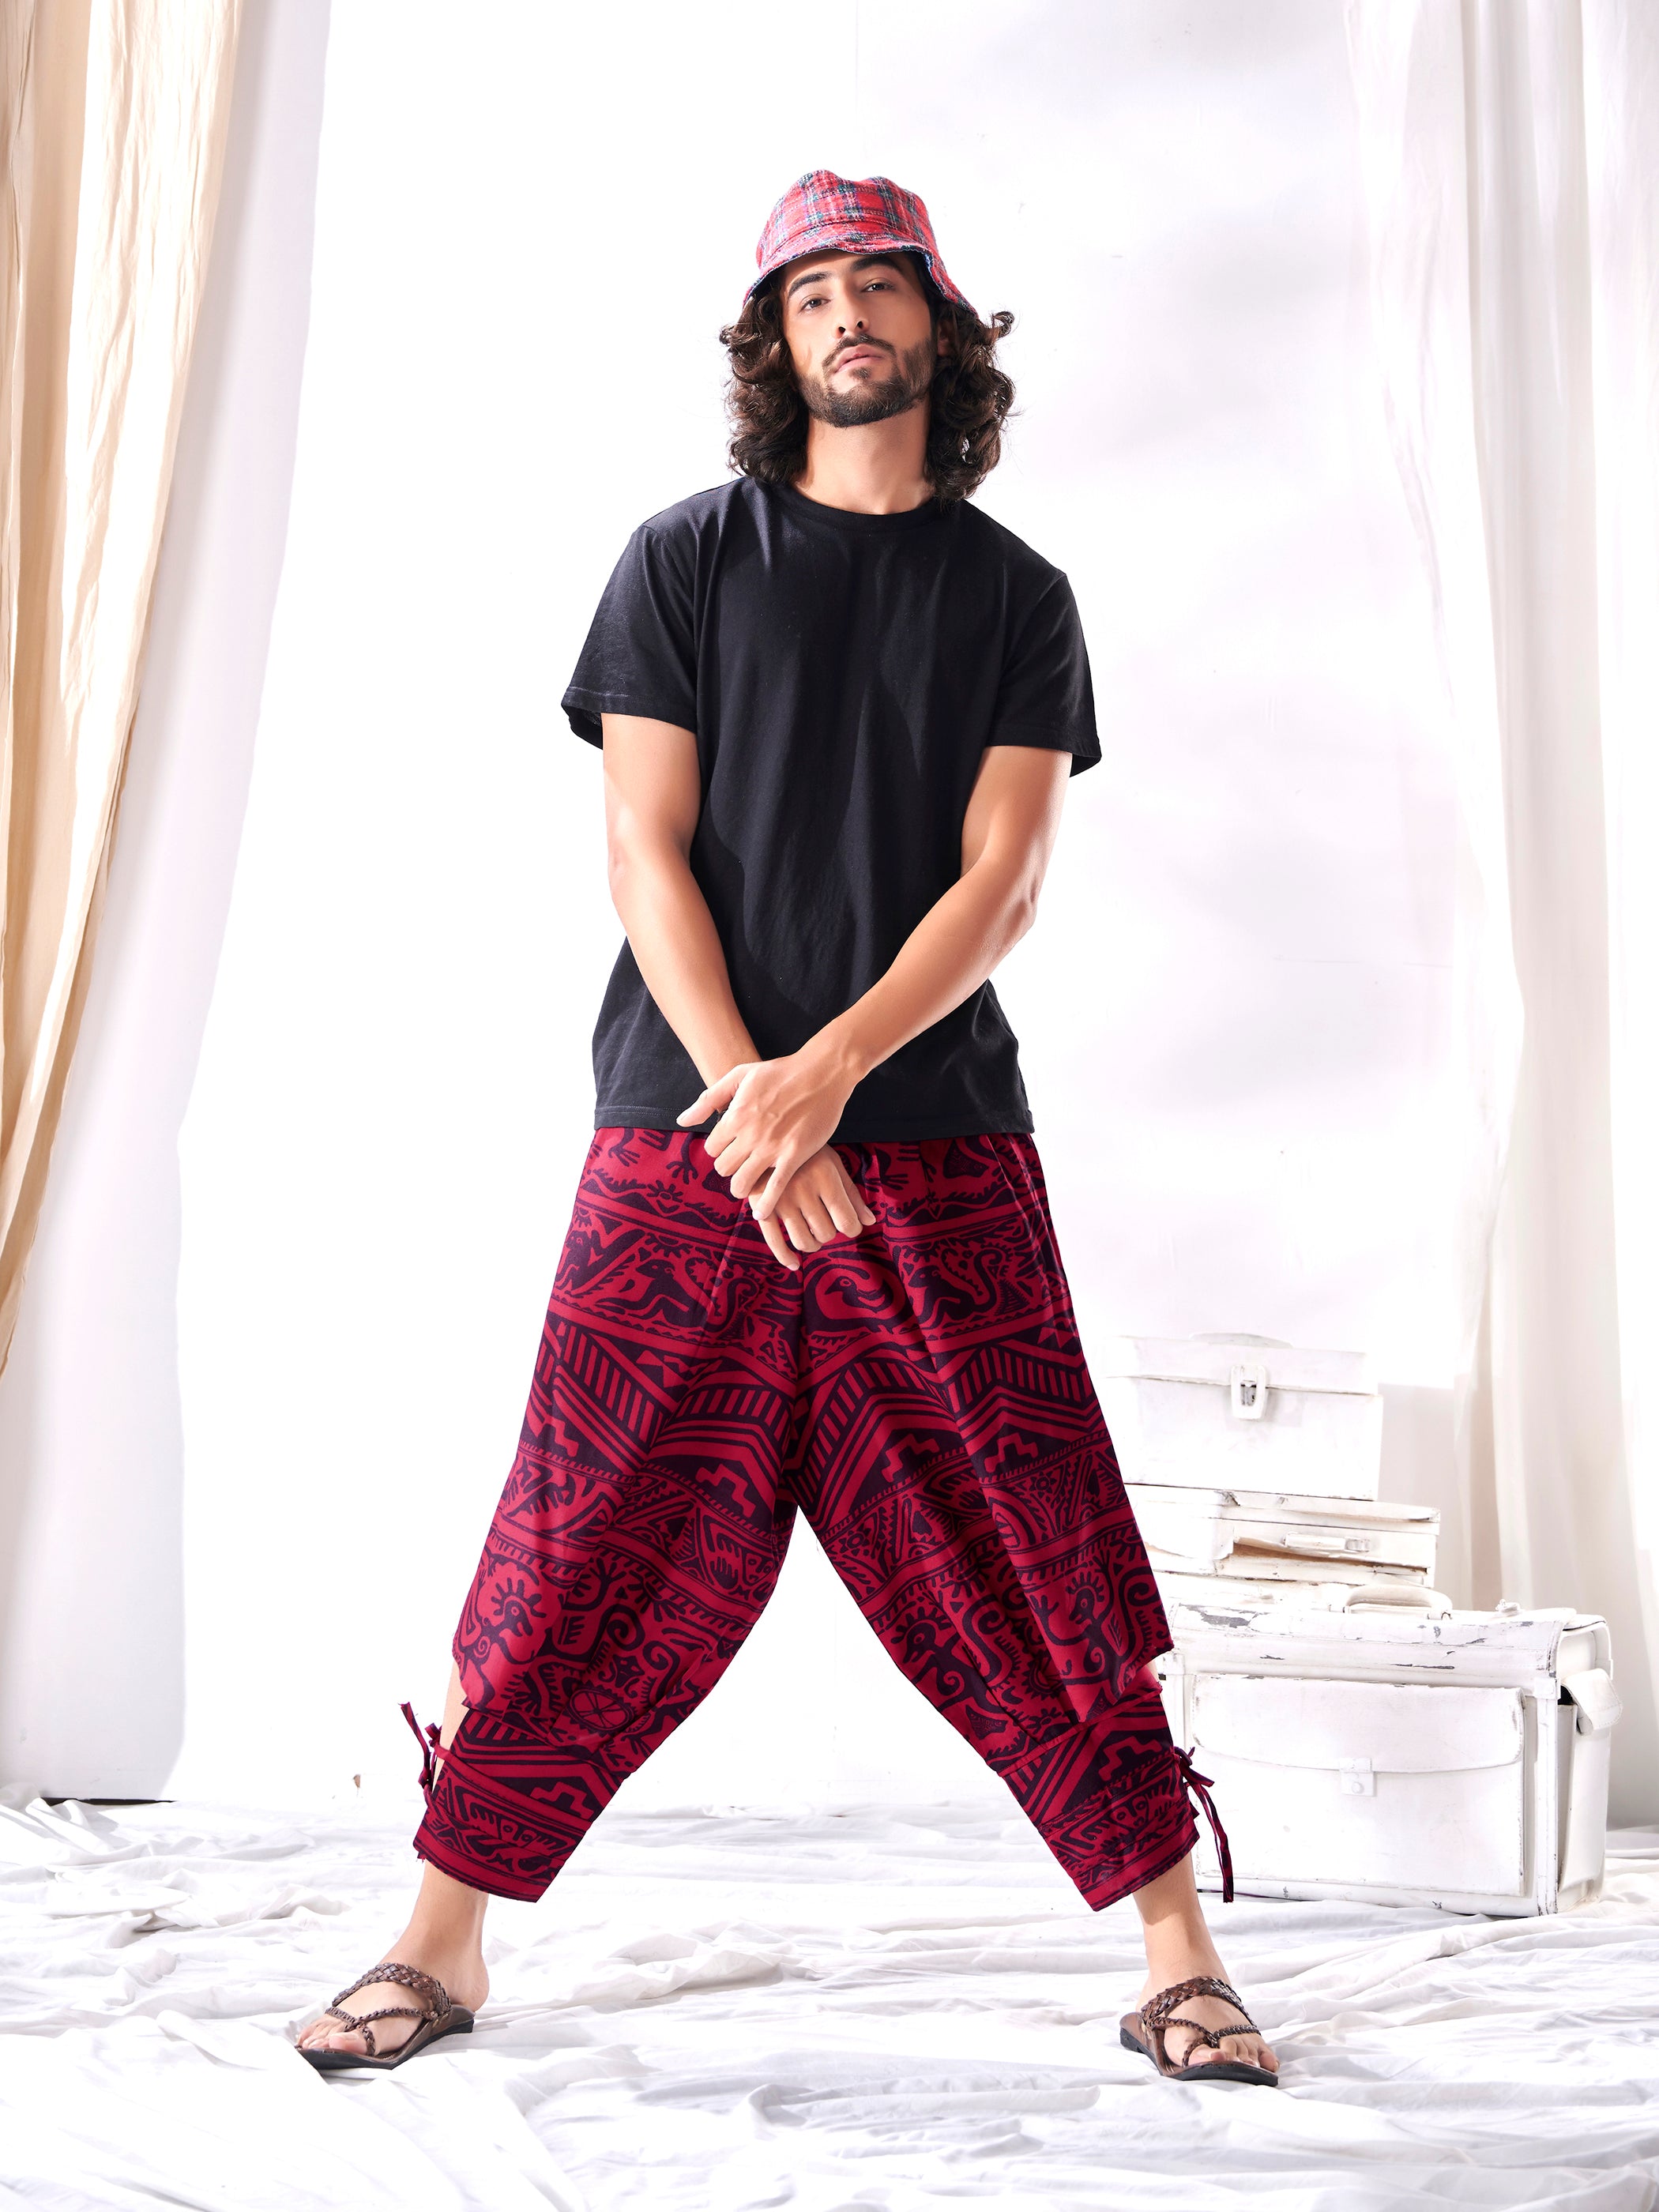 How to create a casual look with men harem pants